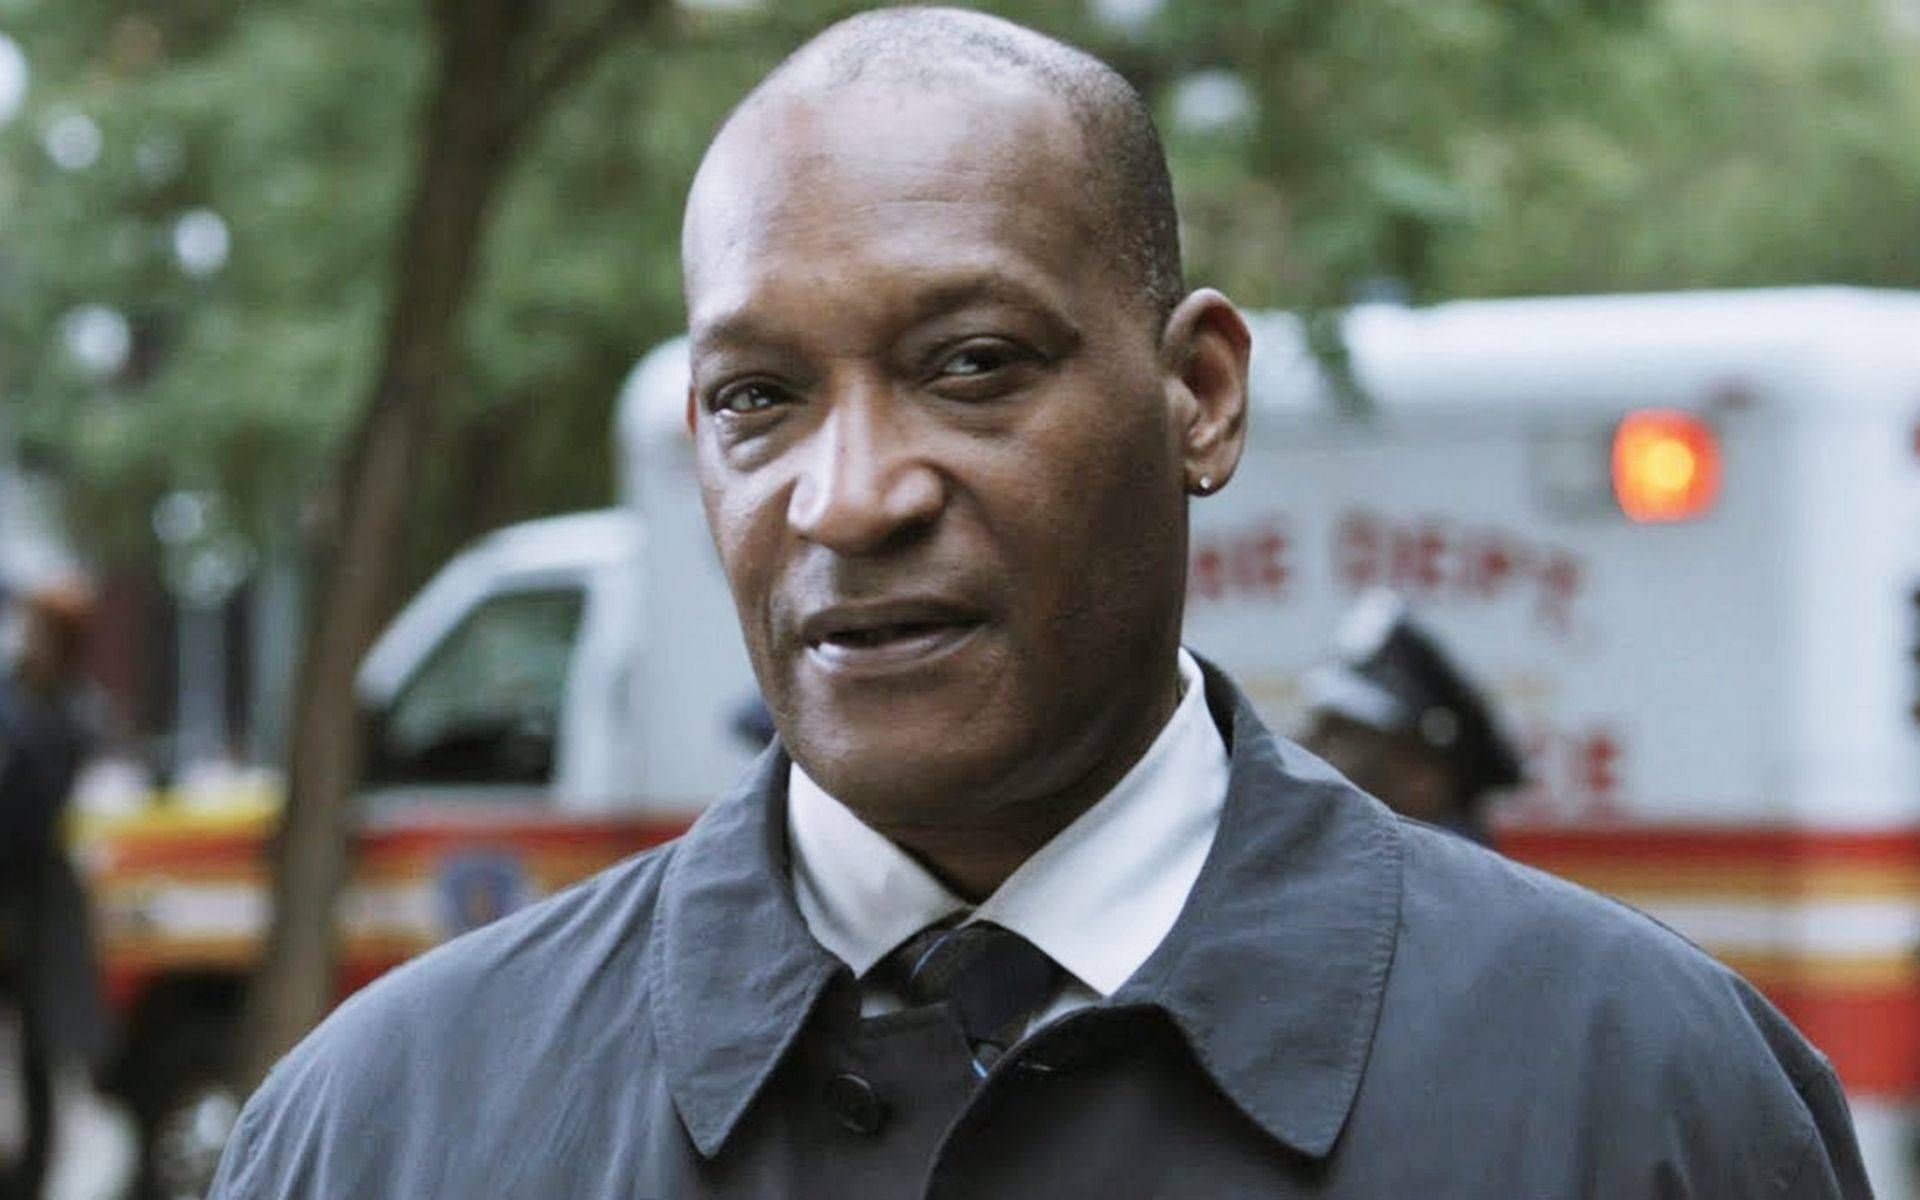 Tony Todd Wiki, Bio, Age, Net Worth, and Other Facts